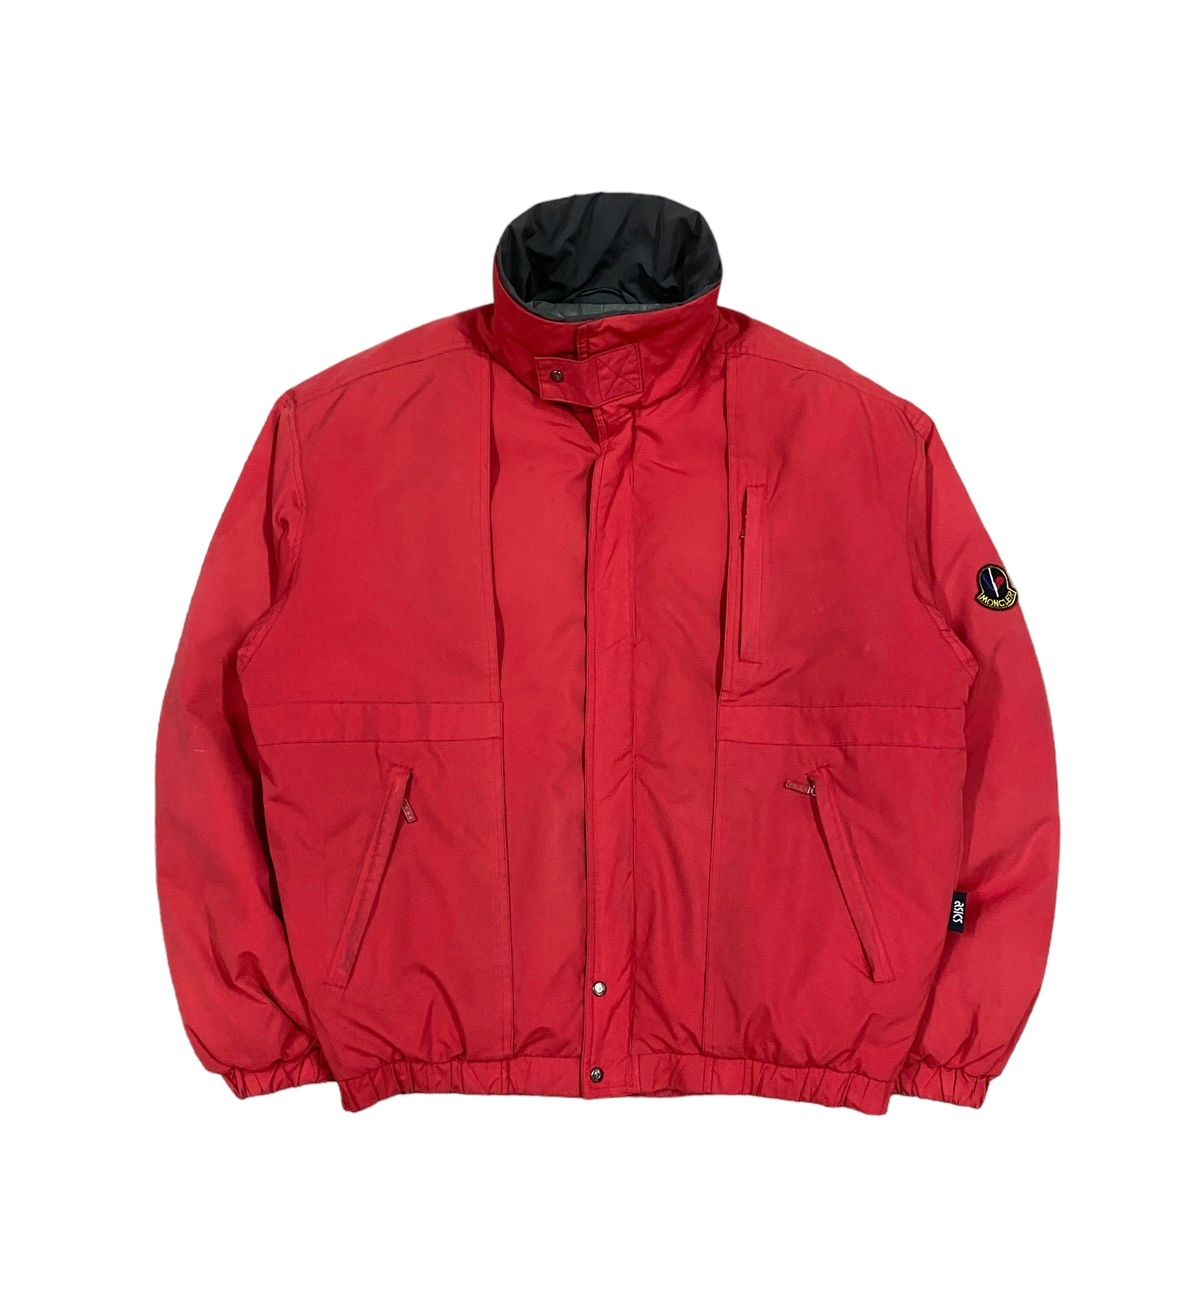 🔥LAST DROP🔥Moncler Thermo Clo System Puffer By Asics - 1